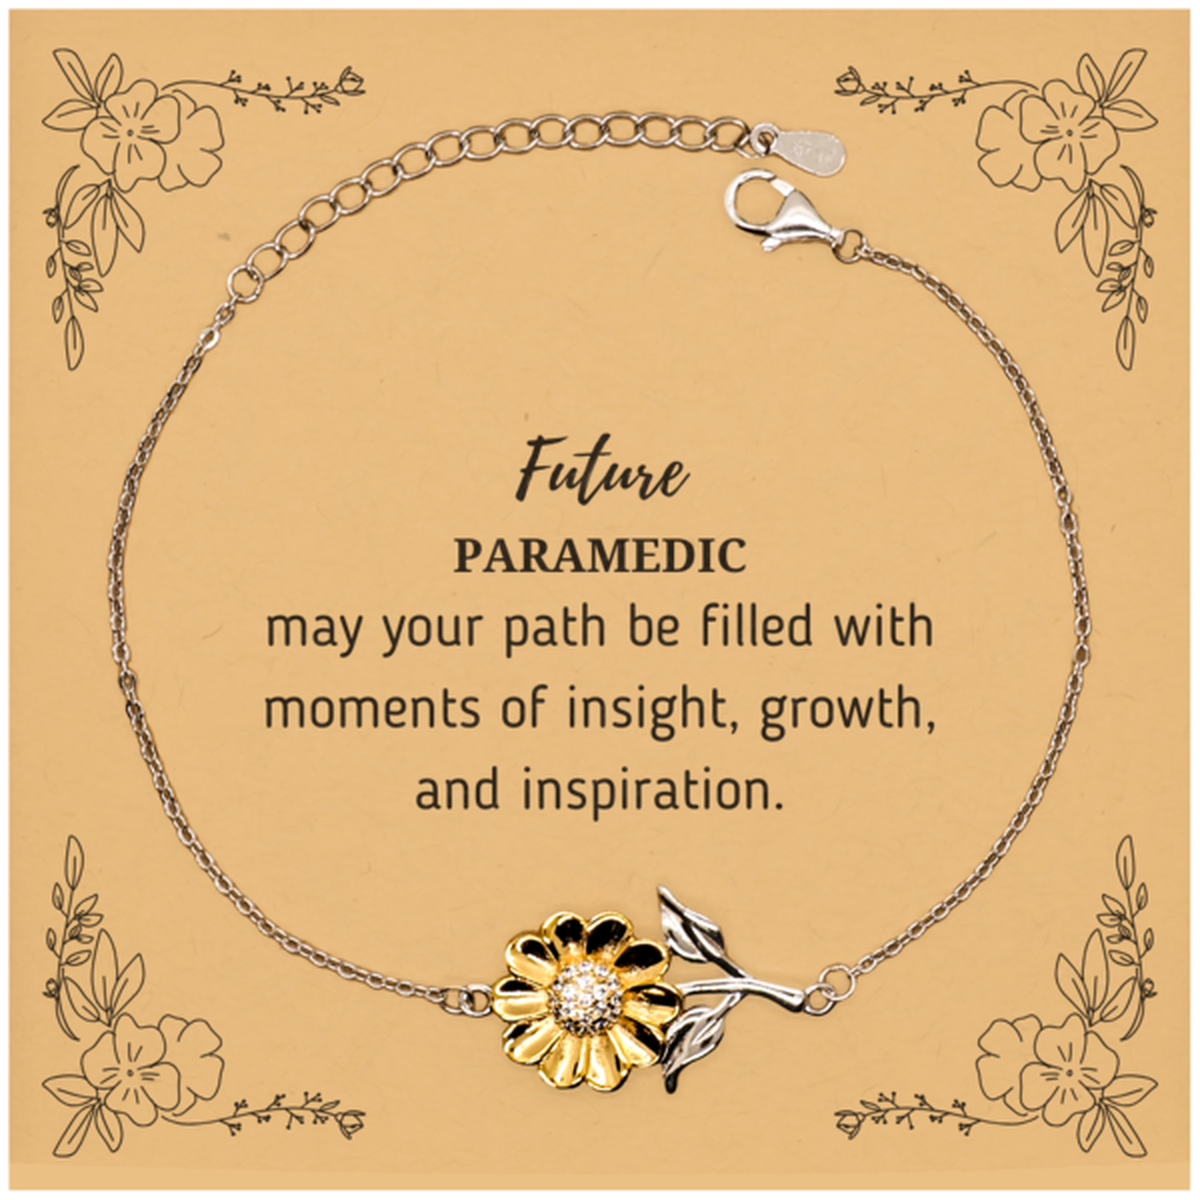 Future Paramedic Gifts, May your path be filled with moments of insight, Graduation Gifts for New Paramedic, Christmas Unique Sunflower Bracelet For Men, Women, Friends